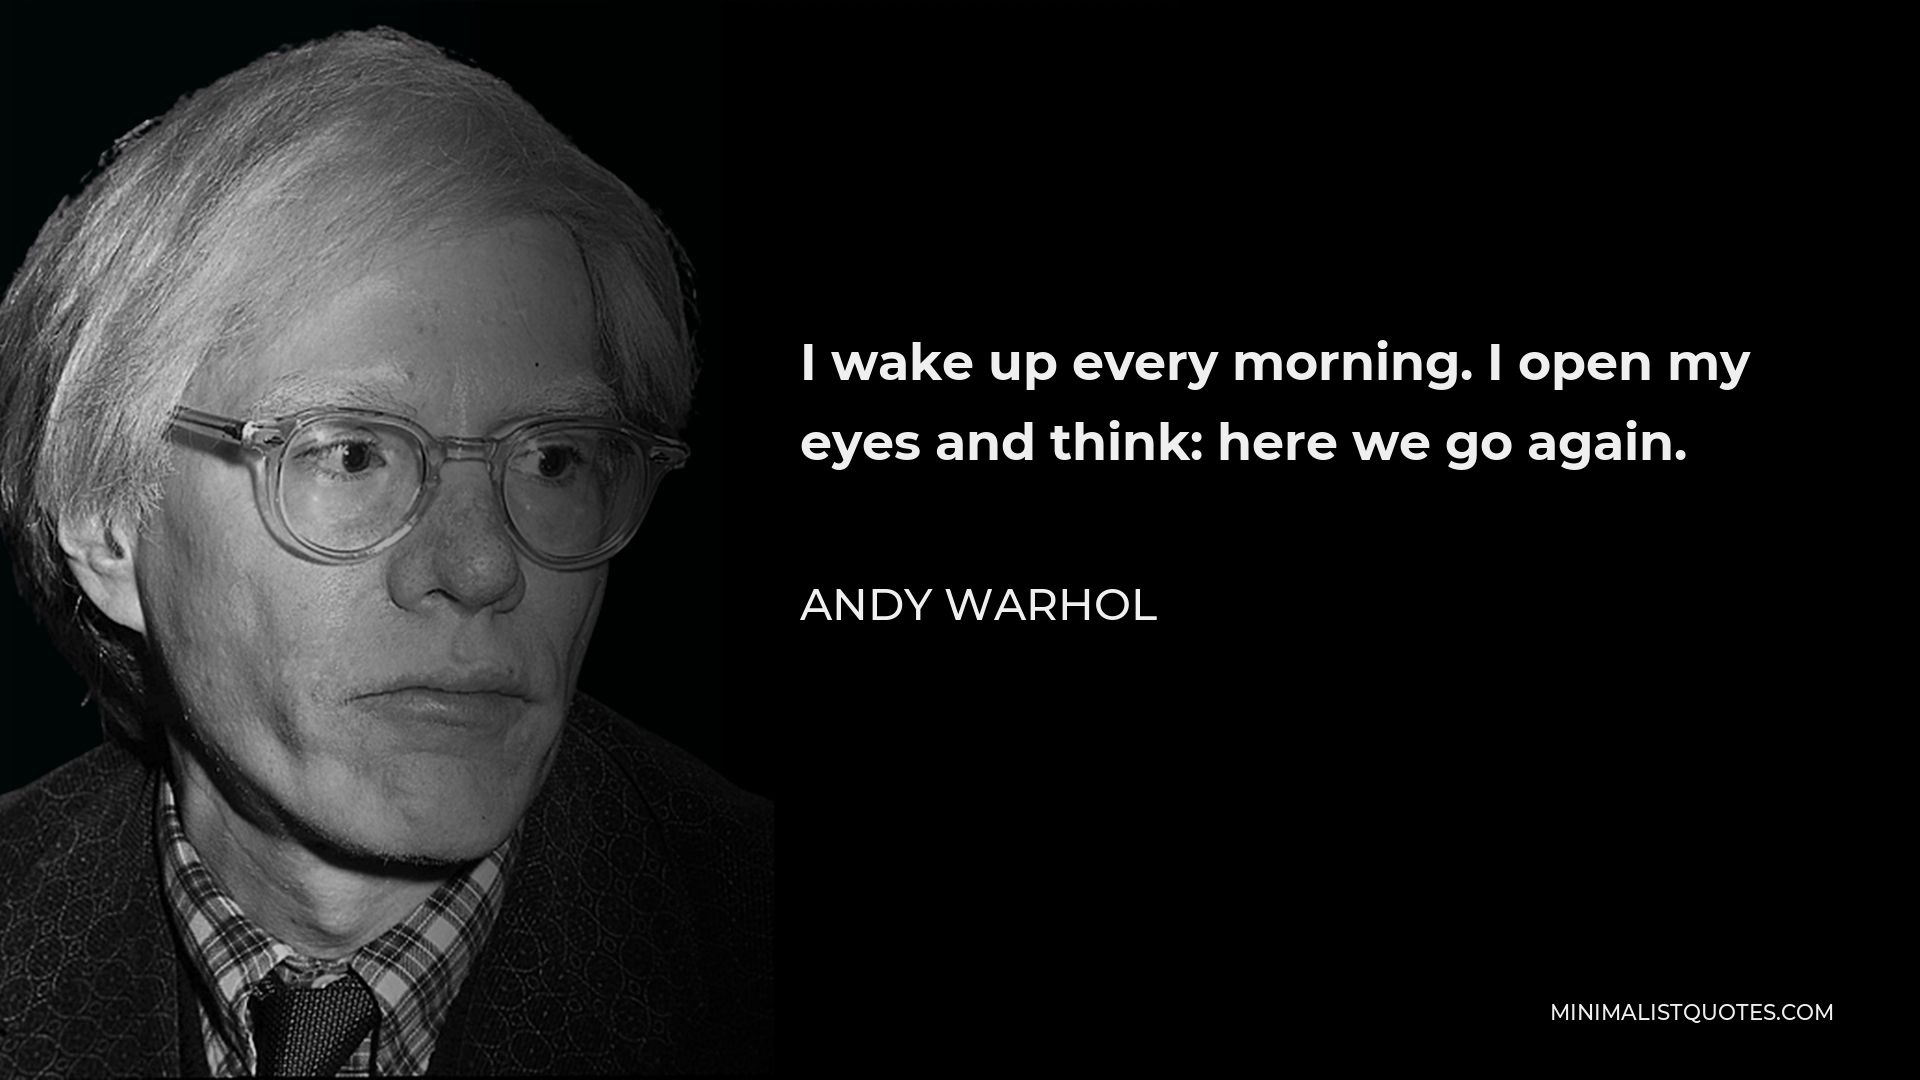 Andy Warhol Quote - I wake up every morning. I open my eyes and think: here we go again.